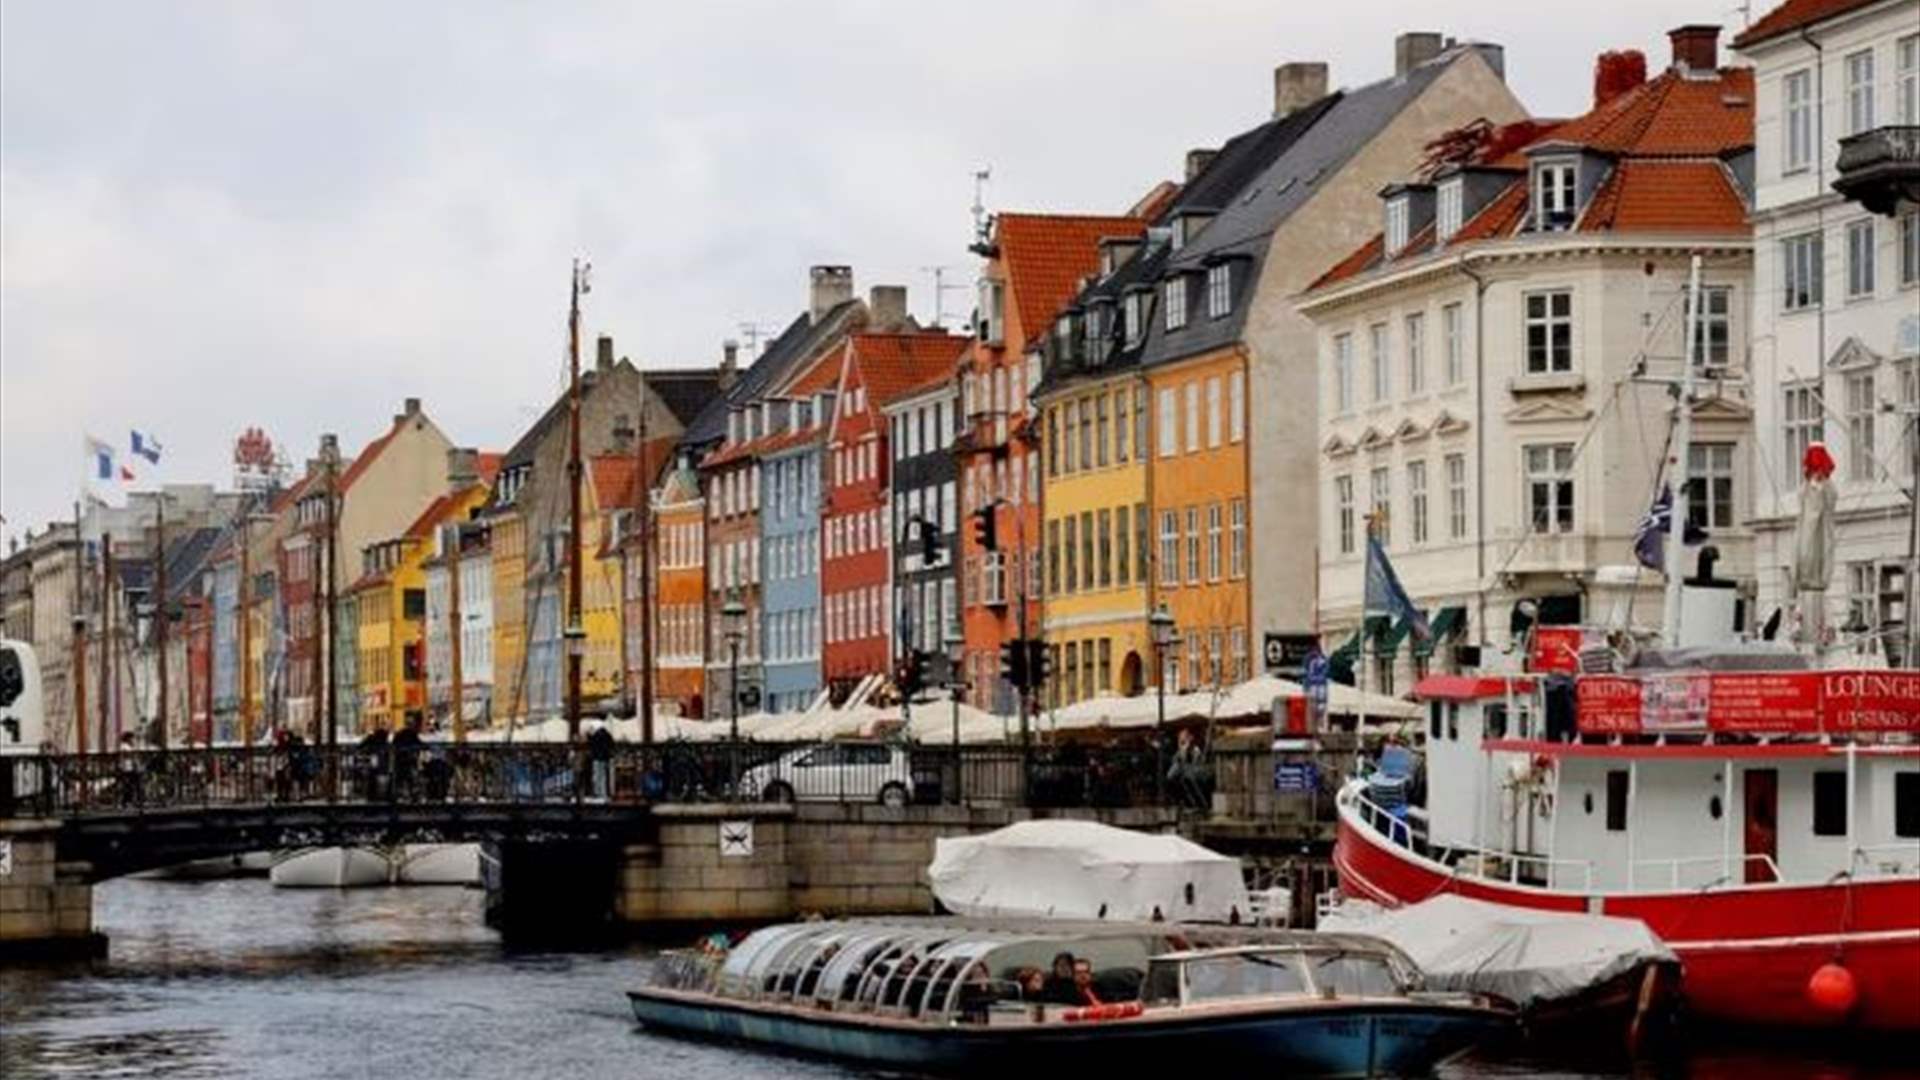 Denmark wants to lower abortion age without parental consent to 15